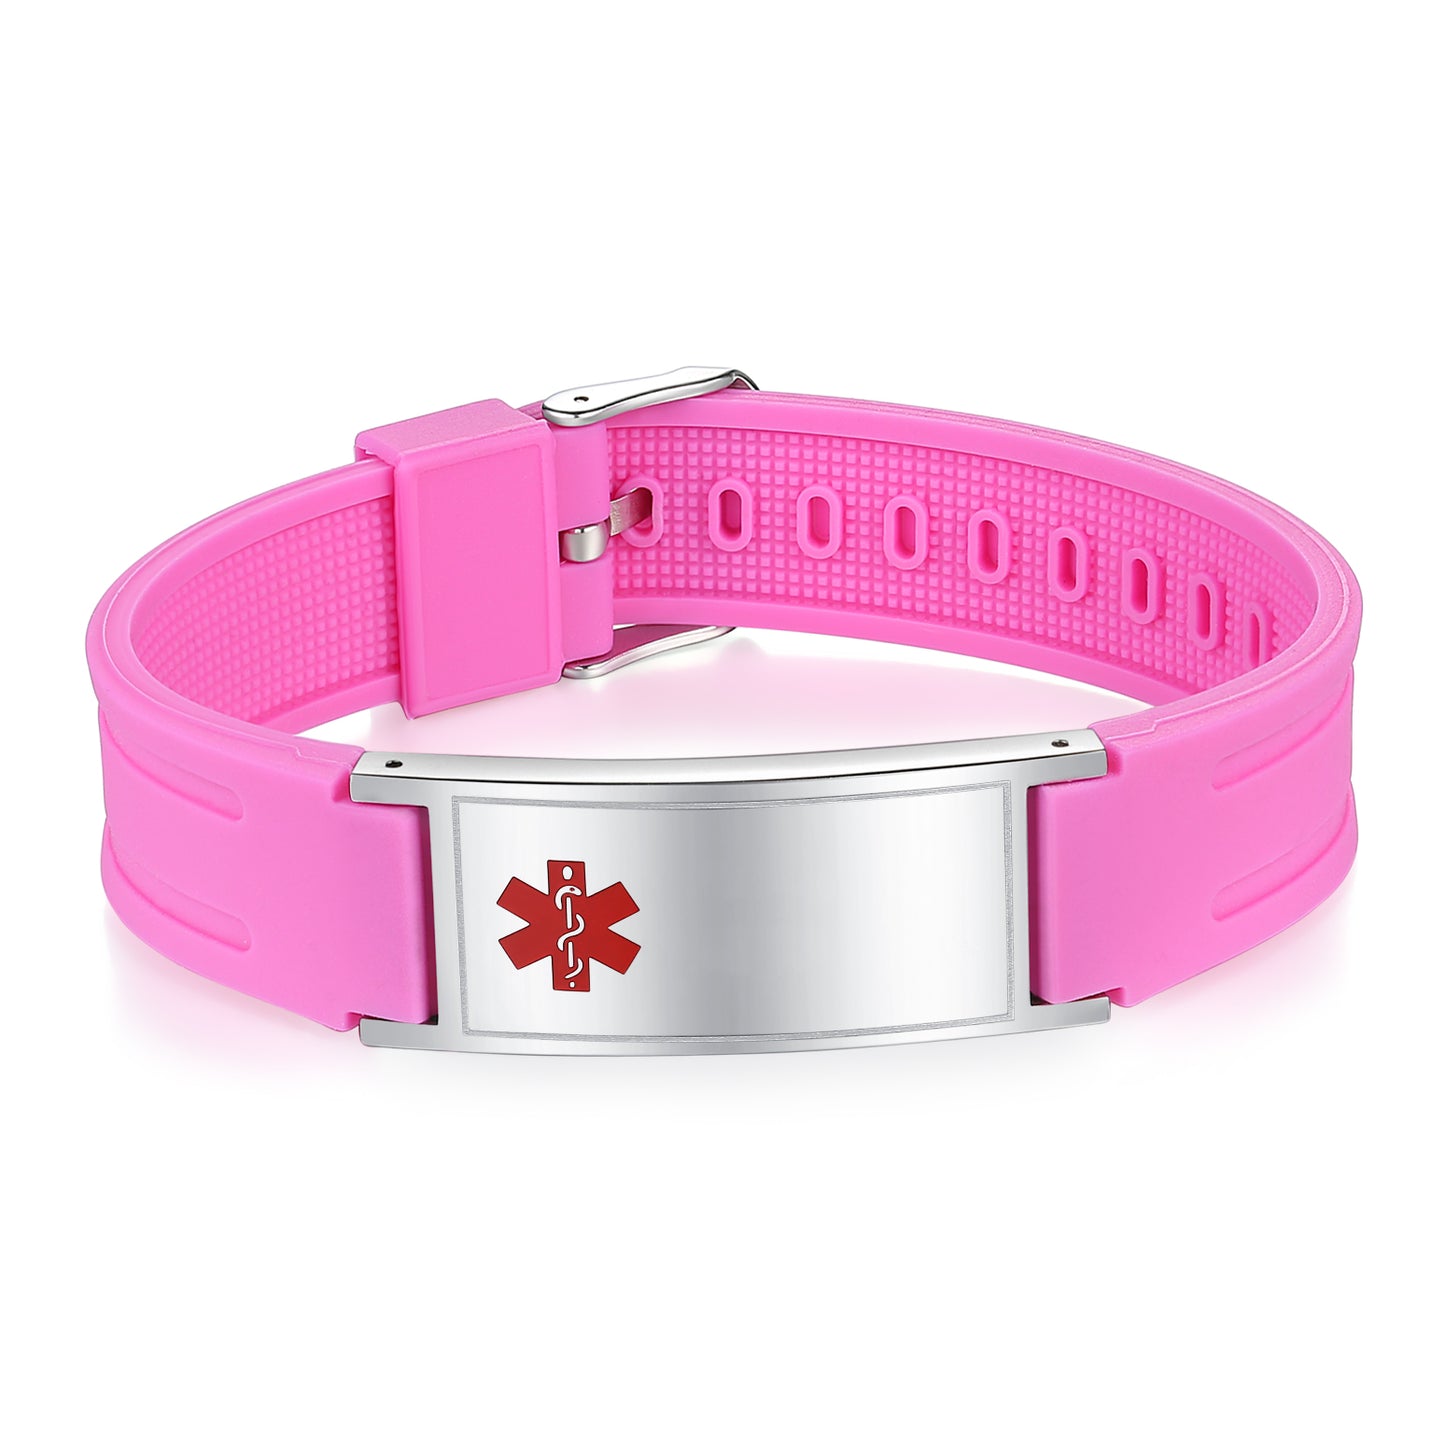 Sports Medical Alert Bracelets for Men & Women Pink Silicone ID Band Suitable for Summer